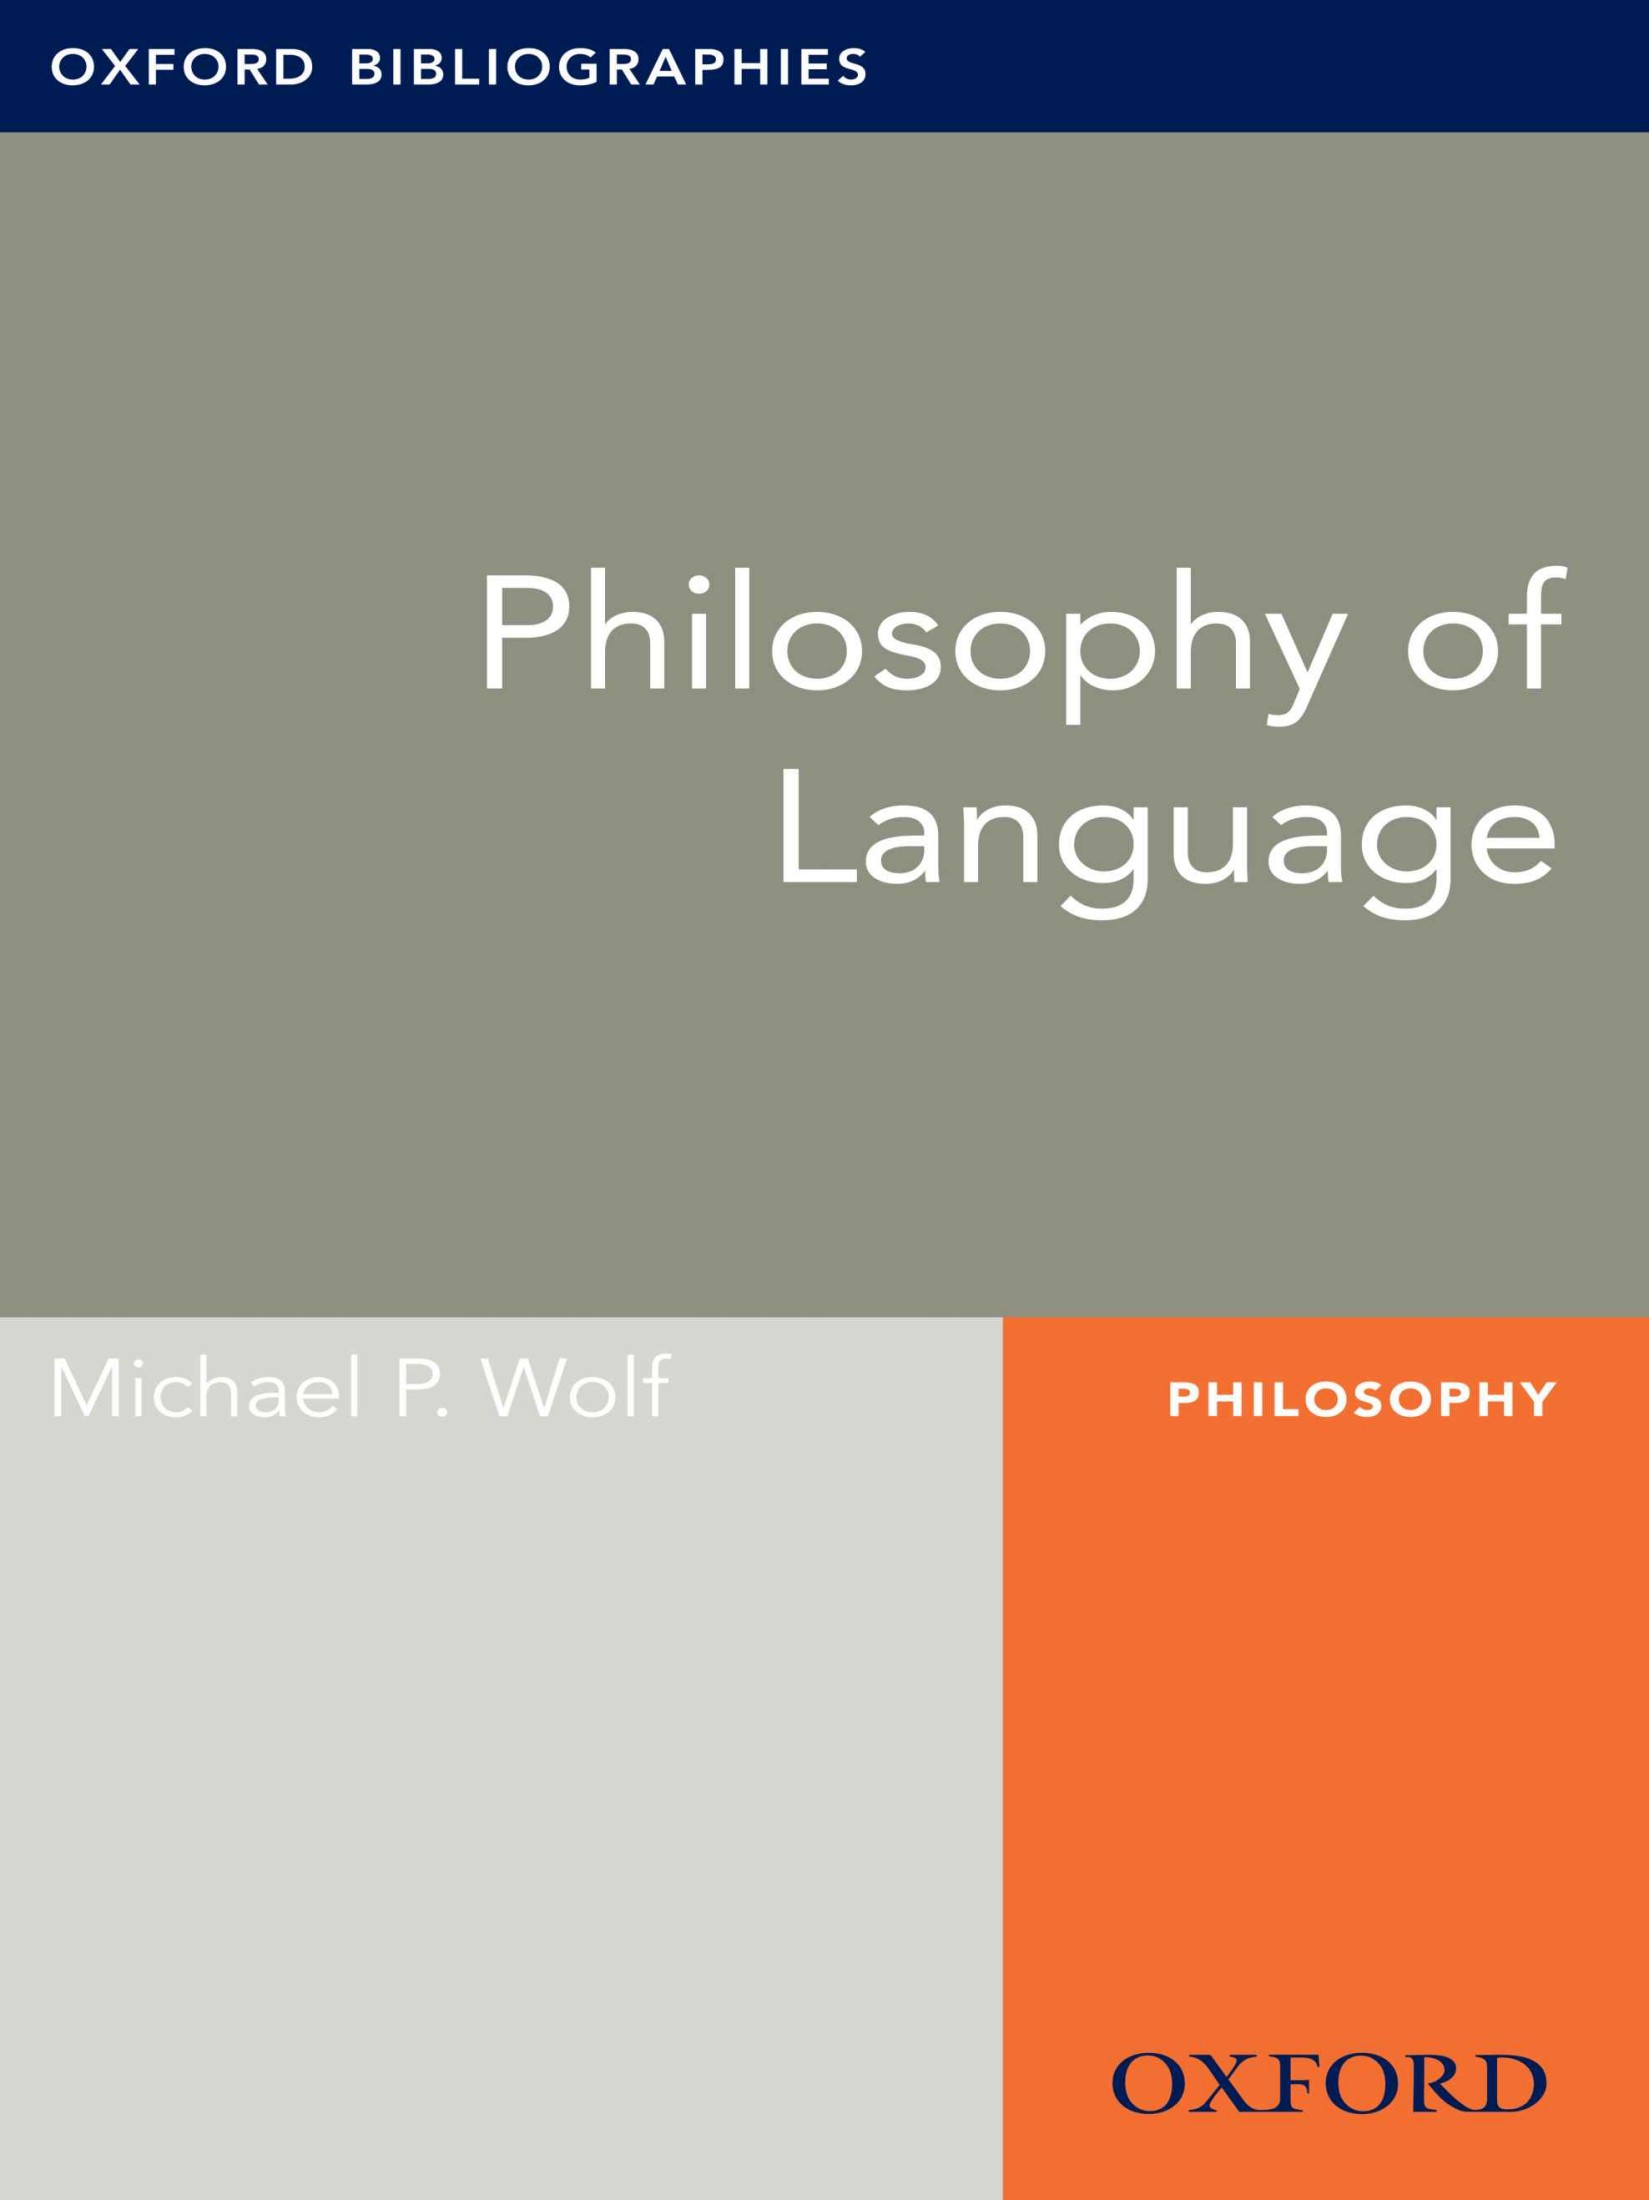 Philosophy of Language: Oxford Bibliographies Online Research Guide